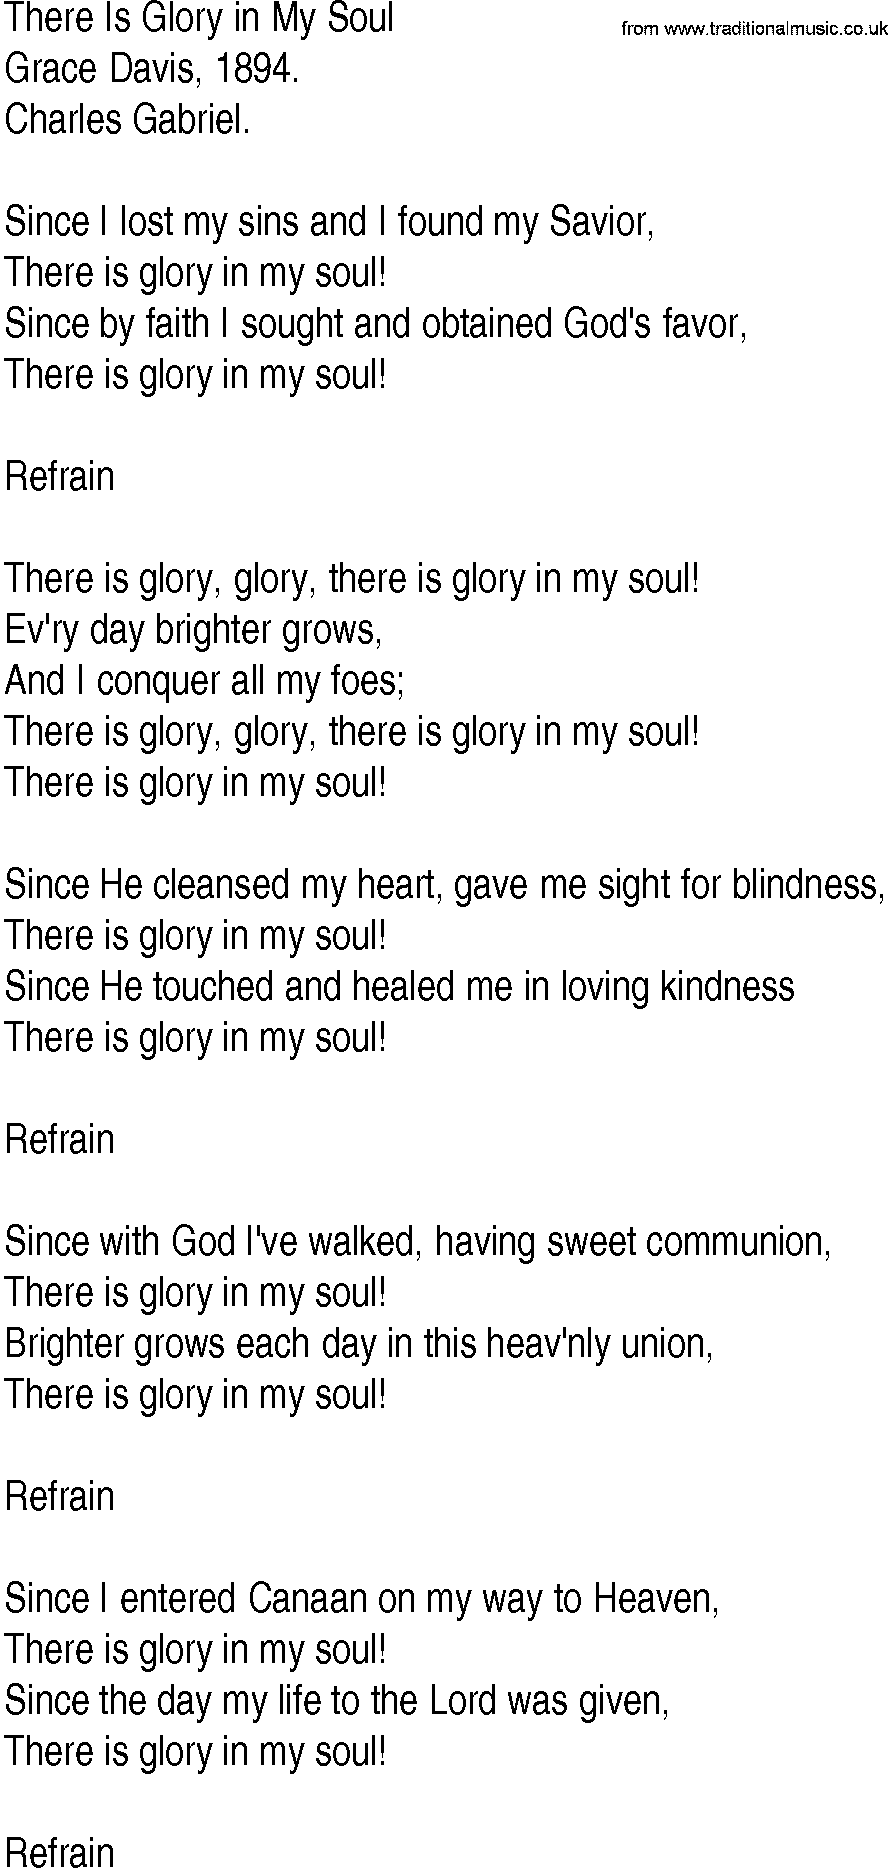 Hymn and Gospel Song: There Is Glory in My Soul by Grace Davis lyrics